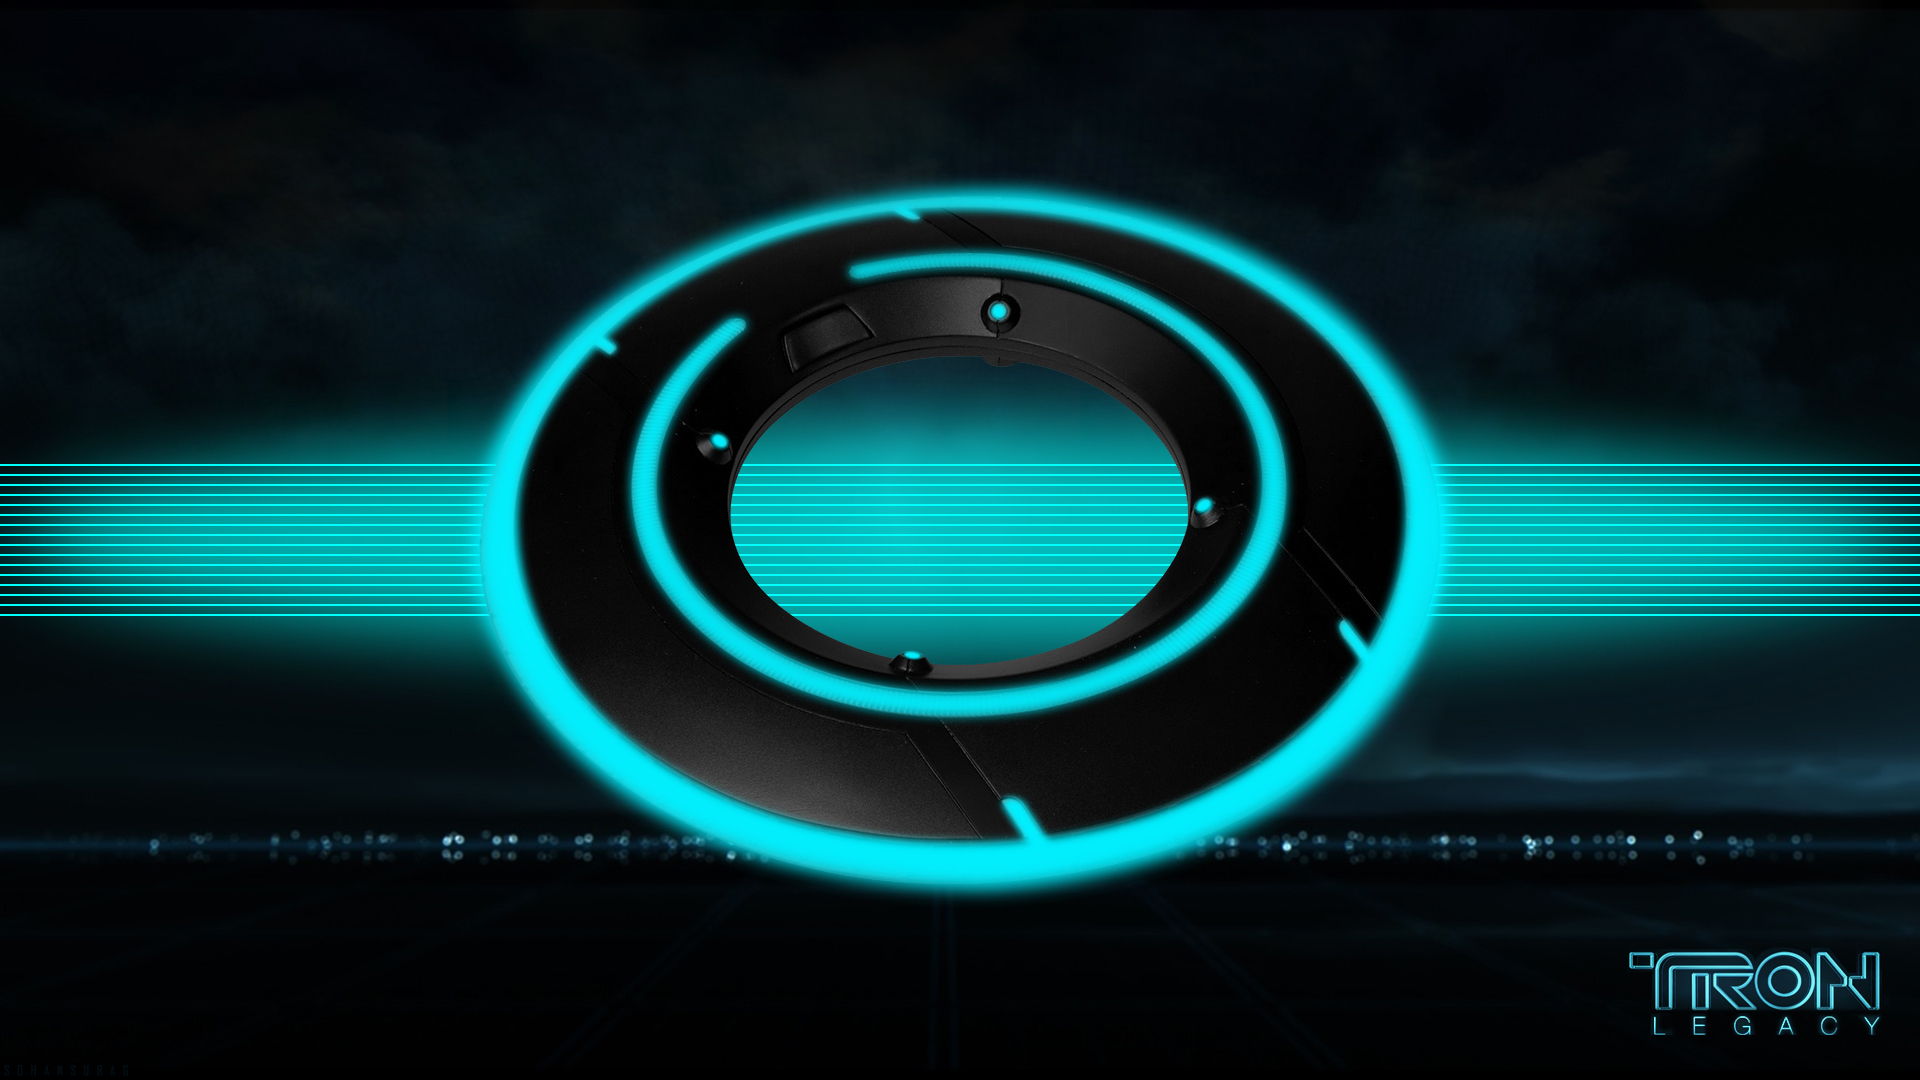 Tron Legacy Wallpapers Megapack Awesome Wallpapers 1920x1080